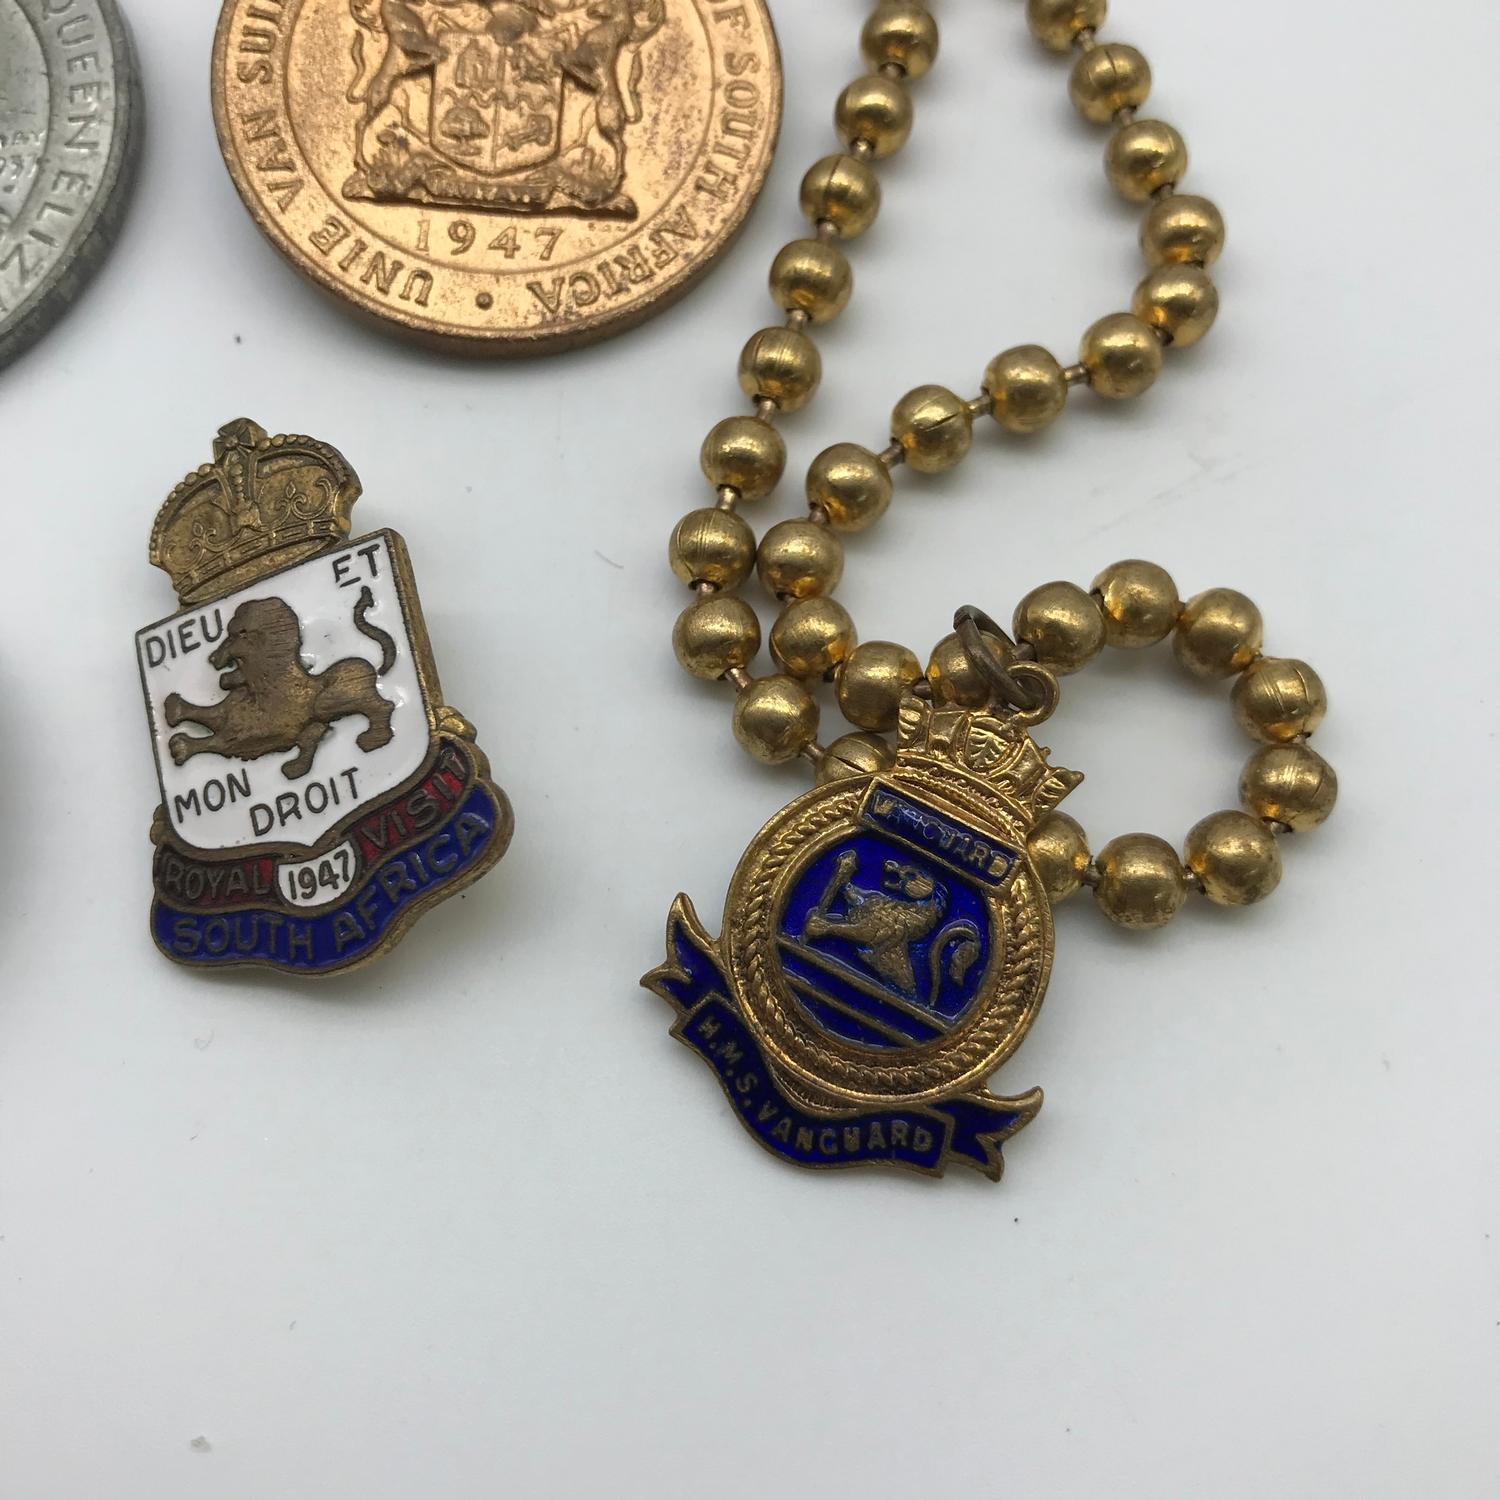 A Lot of two commemorative medals, 1940 silver coin pendant, Royal Visit South Africa 1947 badge and - Image 3 of 4